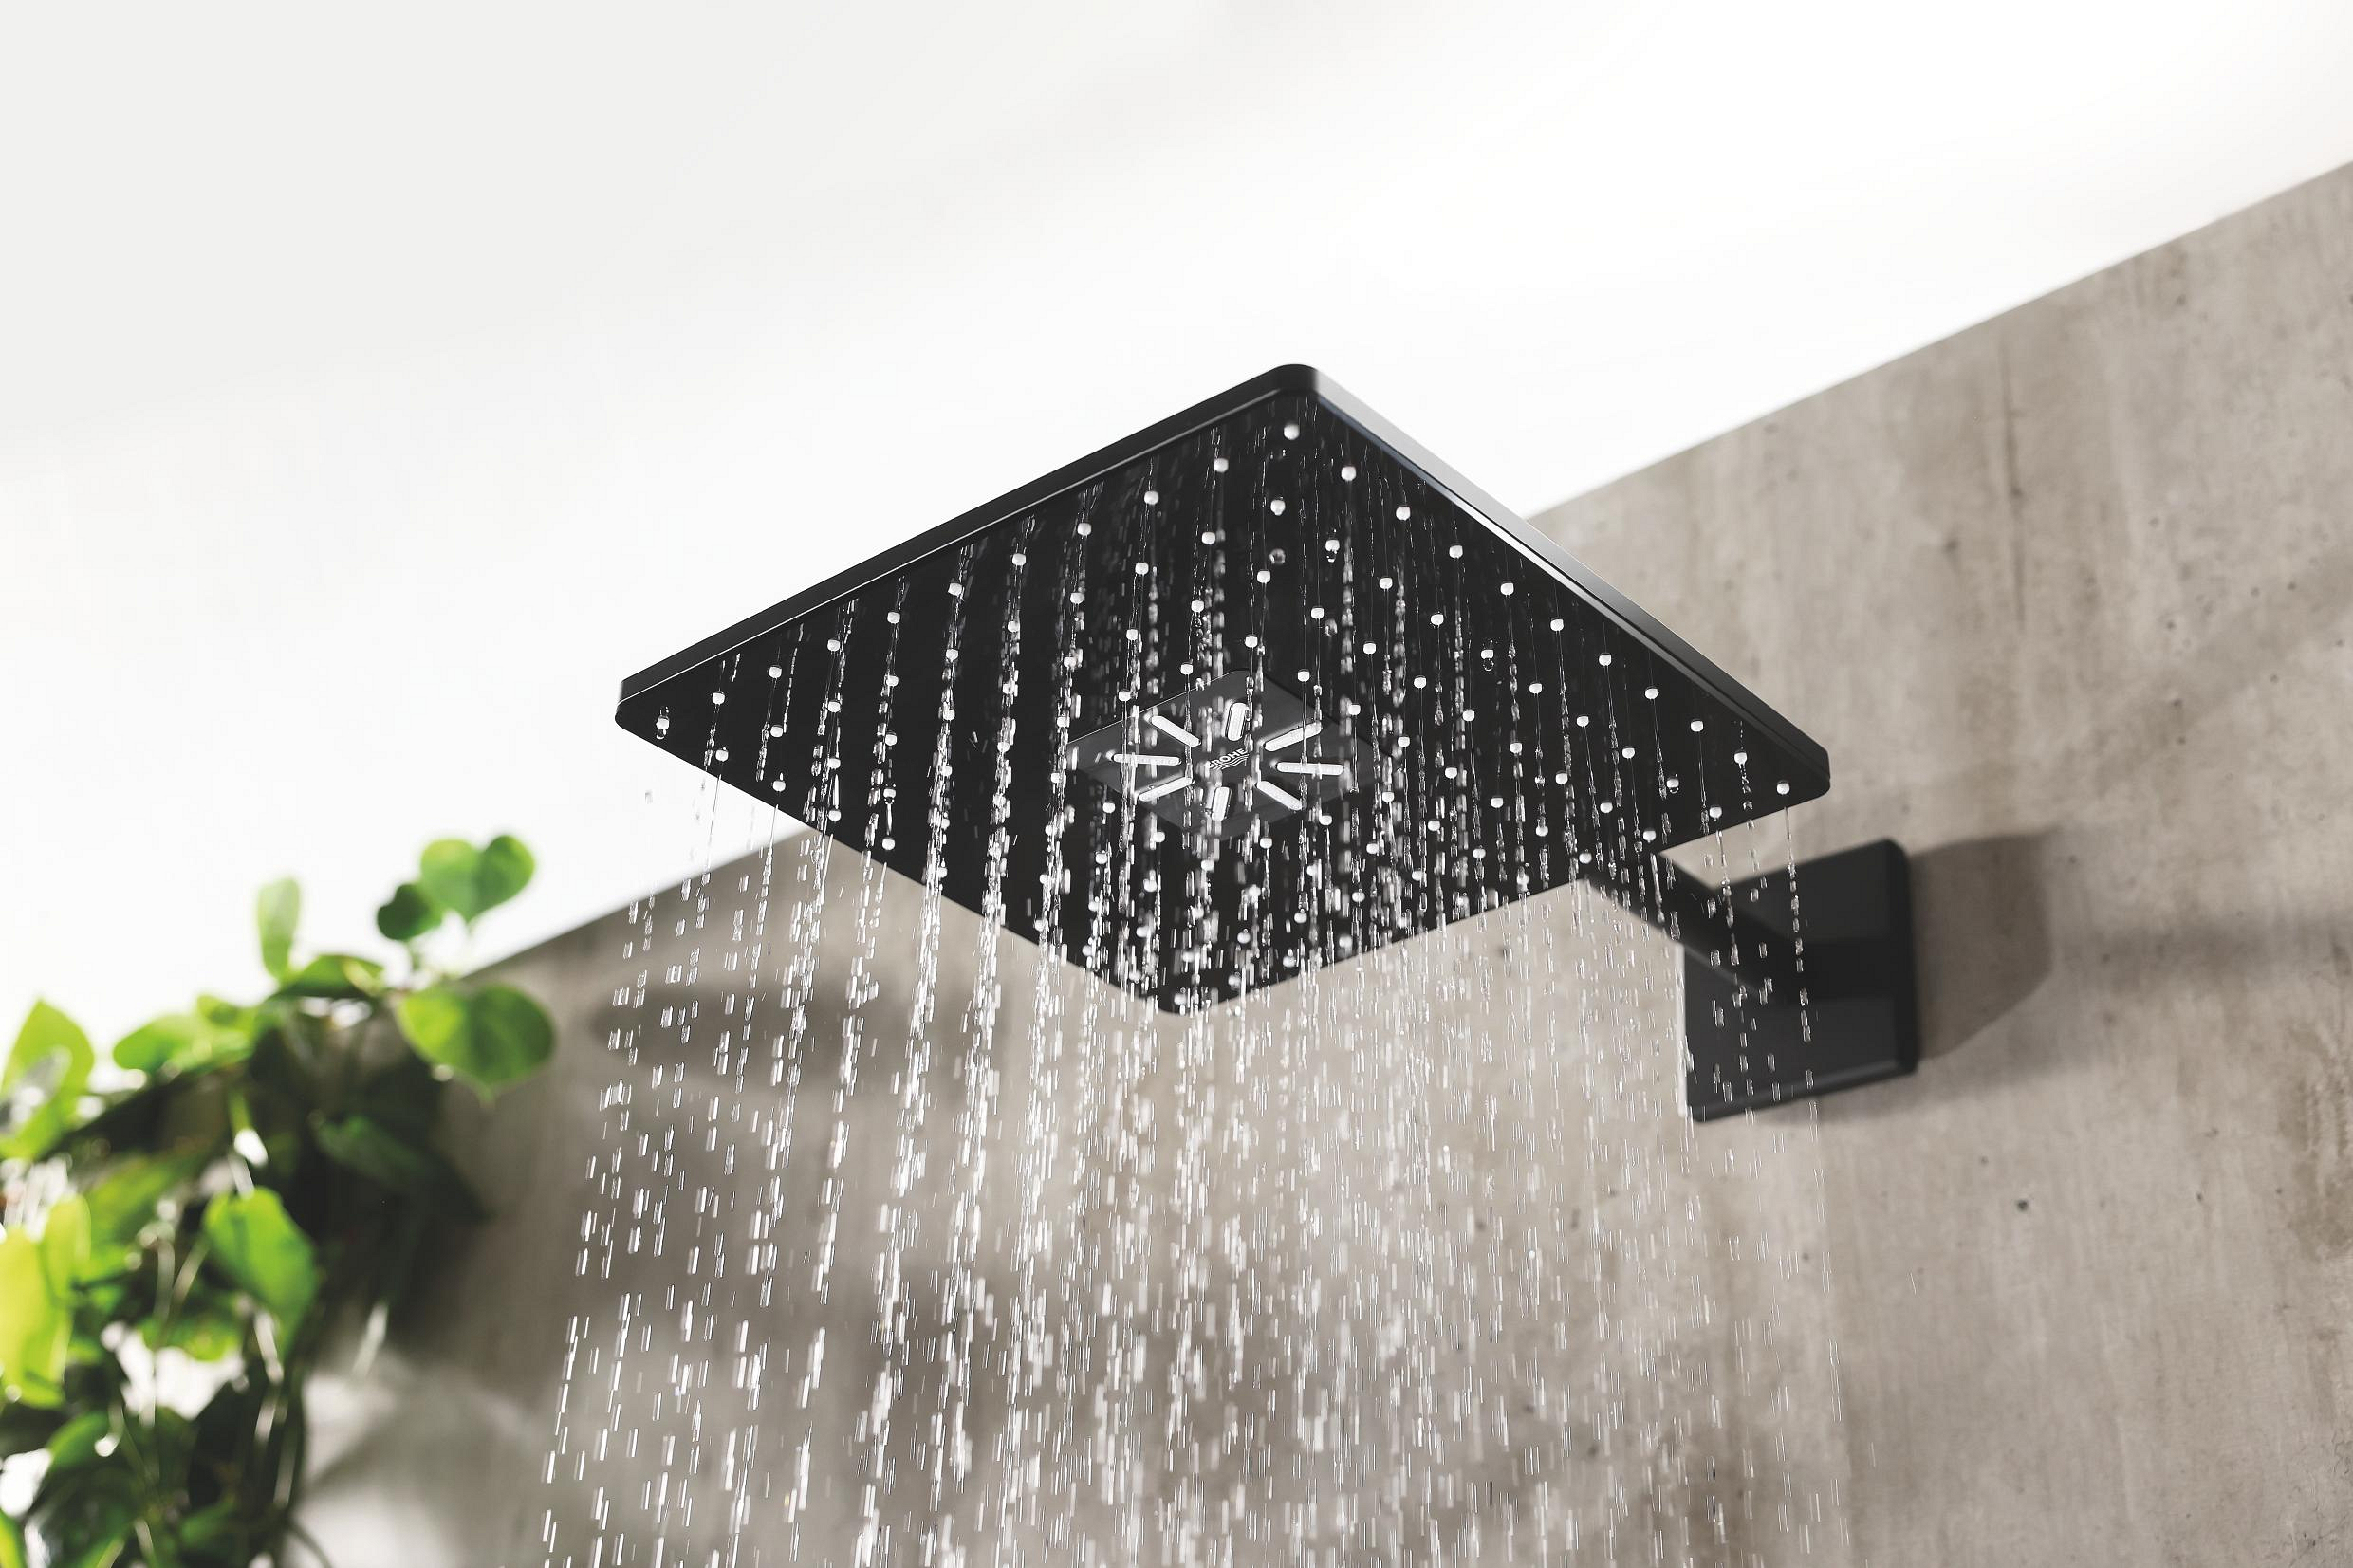 GROHE Everstream - The Endless Shower